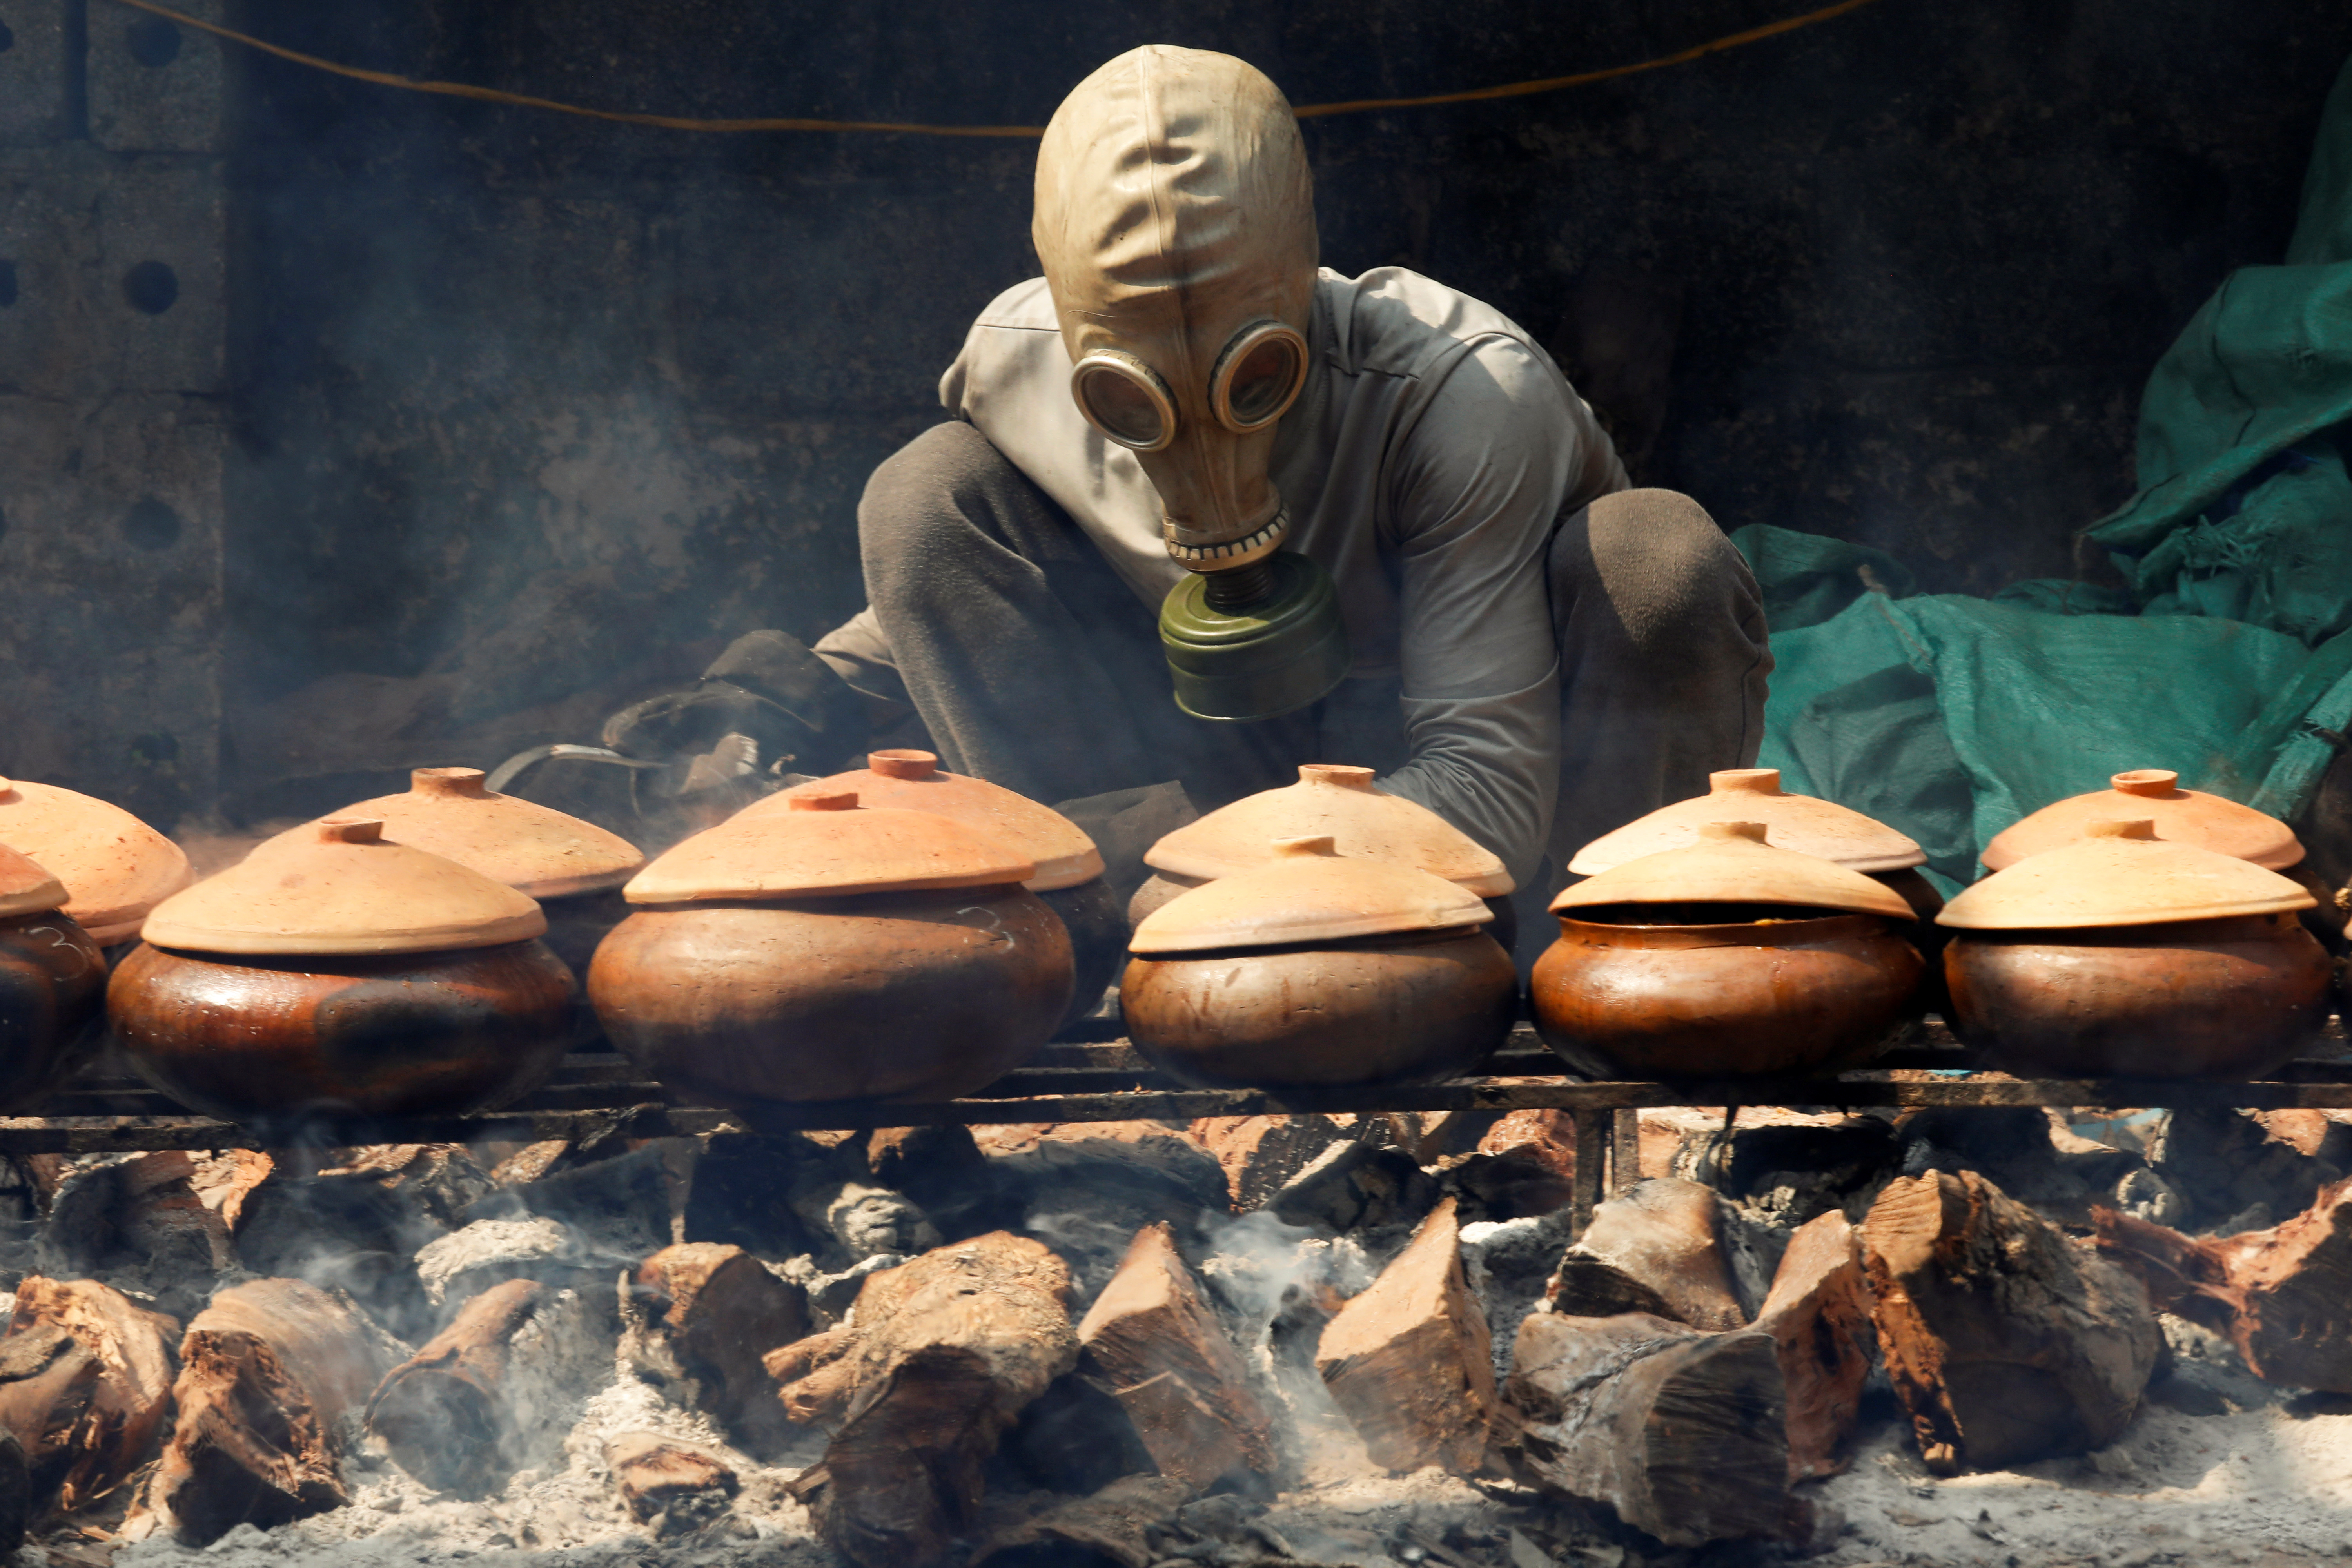 Gas mask on to braise black carp for the Lunar New Year Reuters